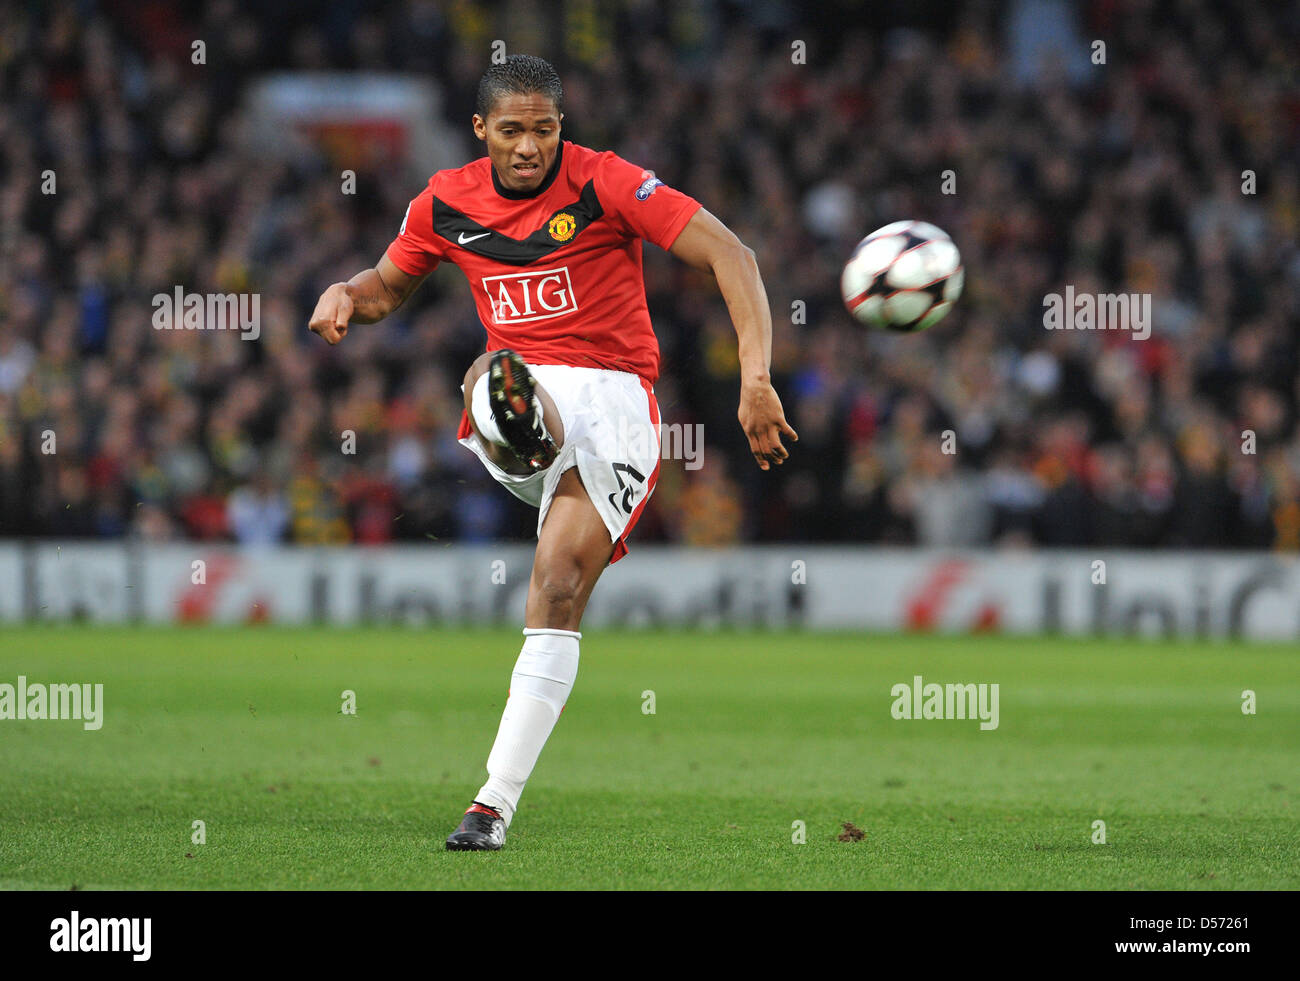 United's Antonio Valencia controls the ball during UEFA Champions League quarter-final match Manchester United vs Bayern Munich at Old Trafford stadium in Manchester, Great Britain, 07 April 2010. Manchester United won the second leg 3-2, yet Munich moves up to semi-final winning 4-4 on aggregate and away goals. Photo: ANDREAS GEBERT Stock Photo